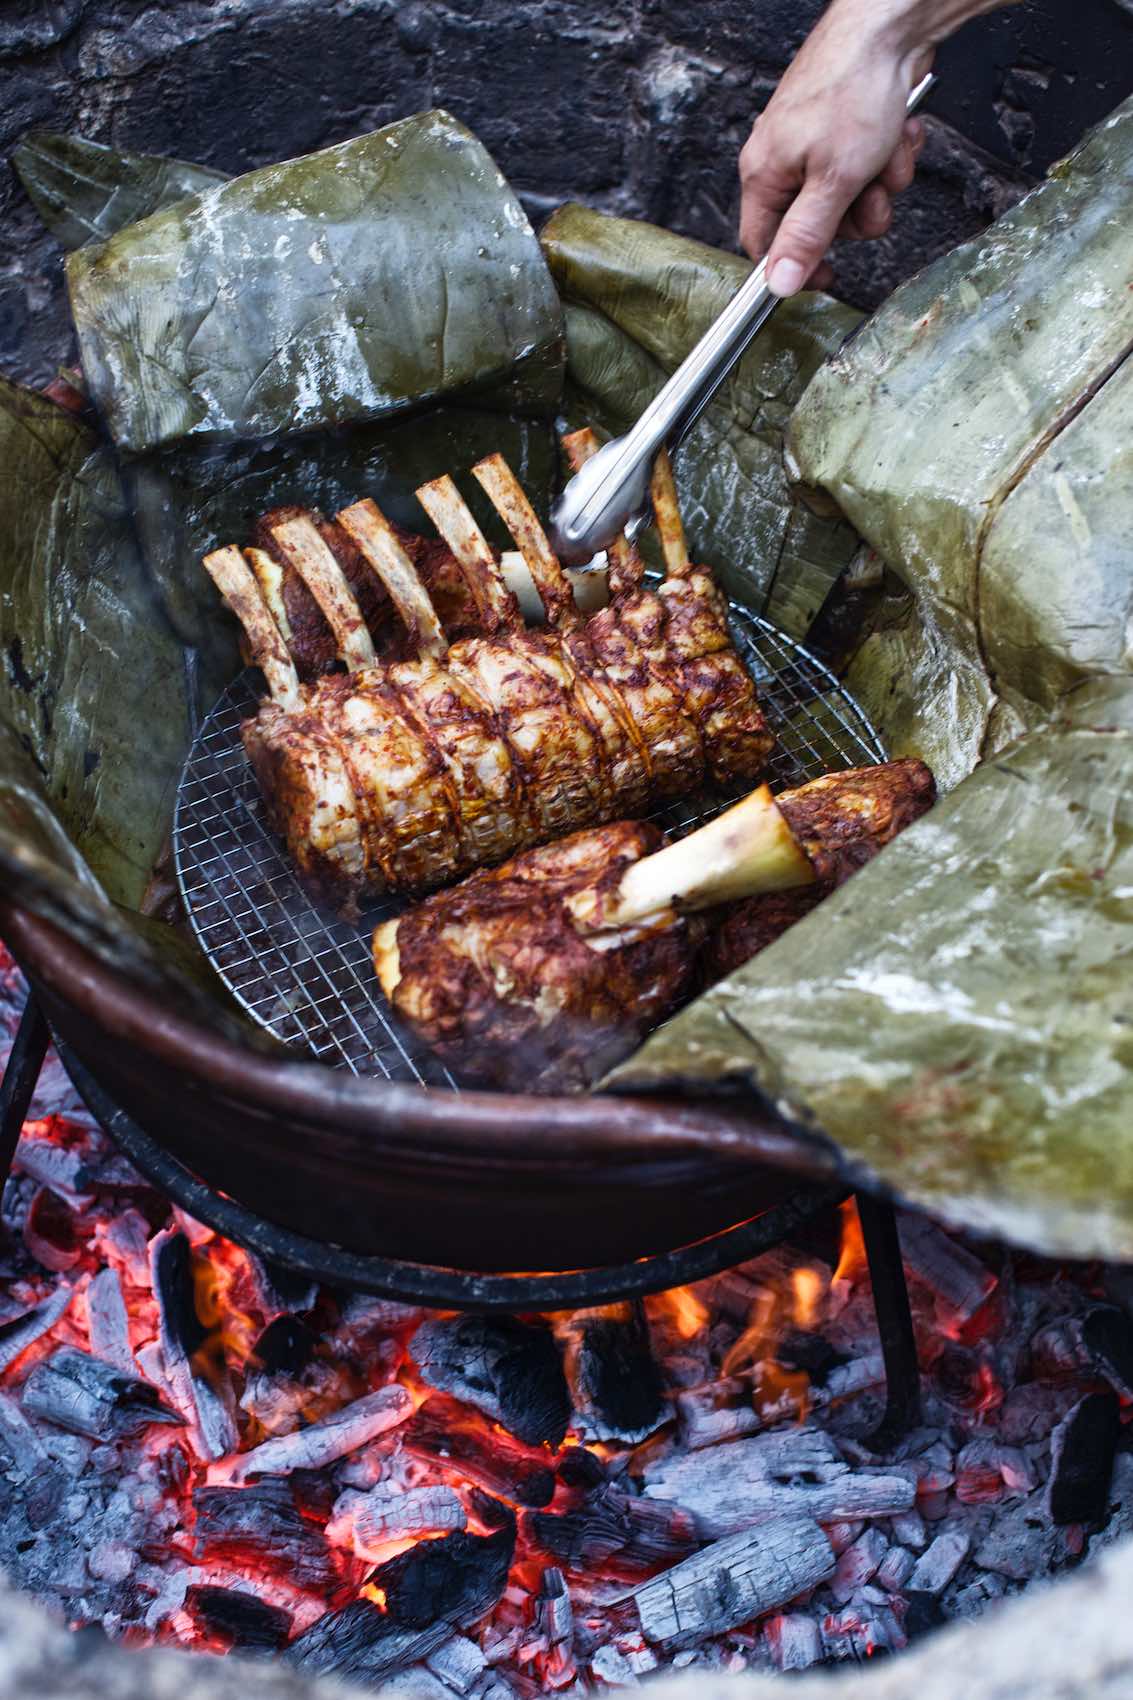 Jody Horton Photography - Meats cooking in leaves on outdoor fire. 